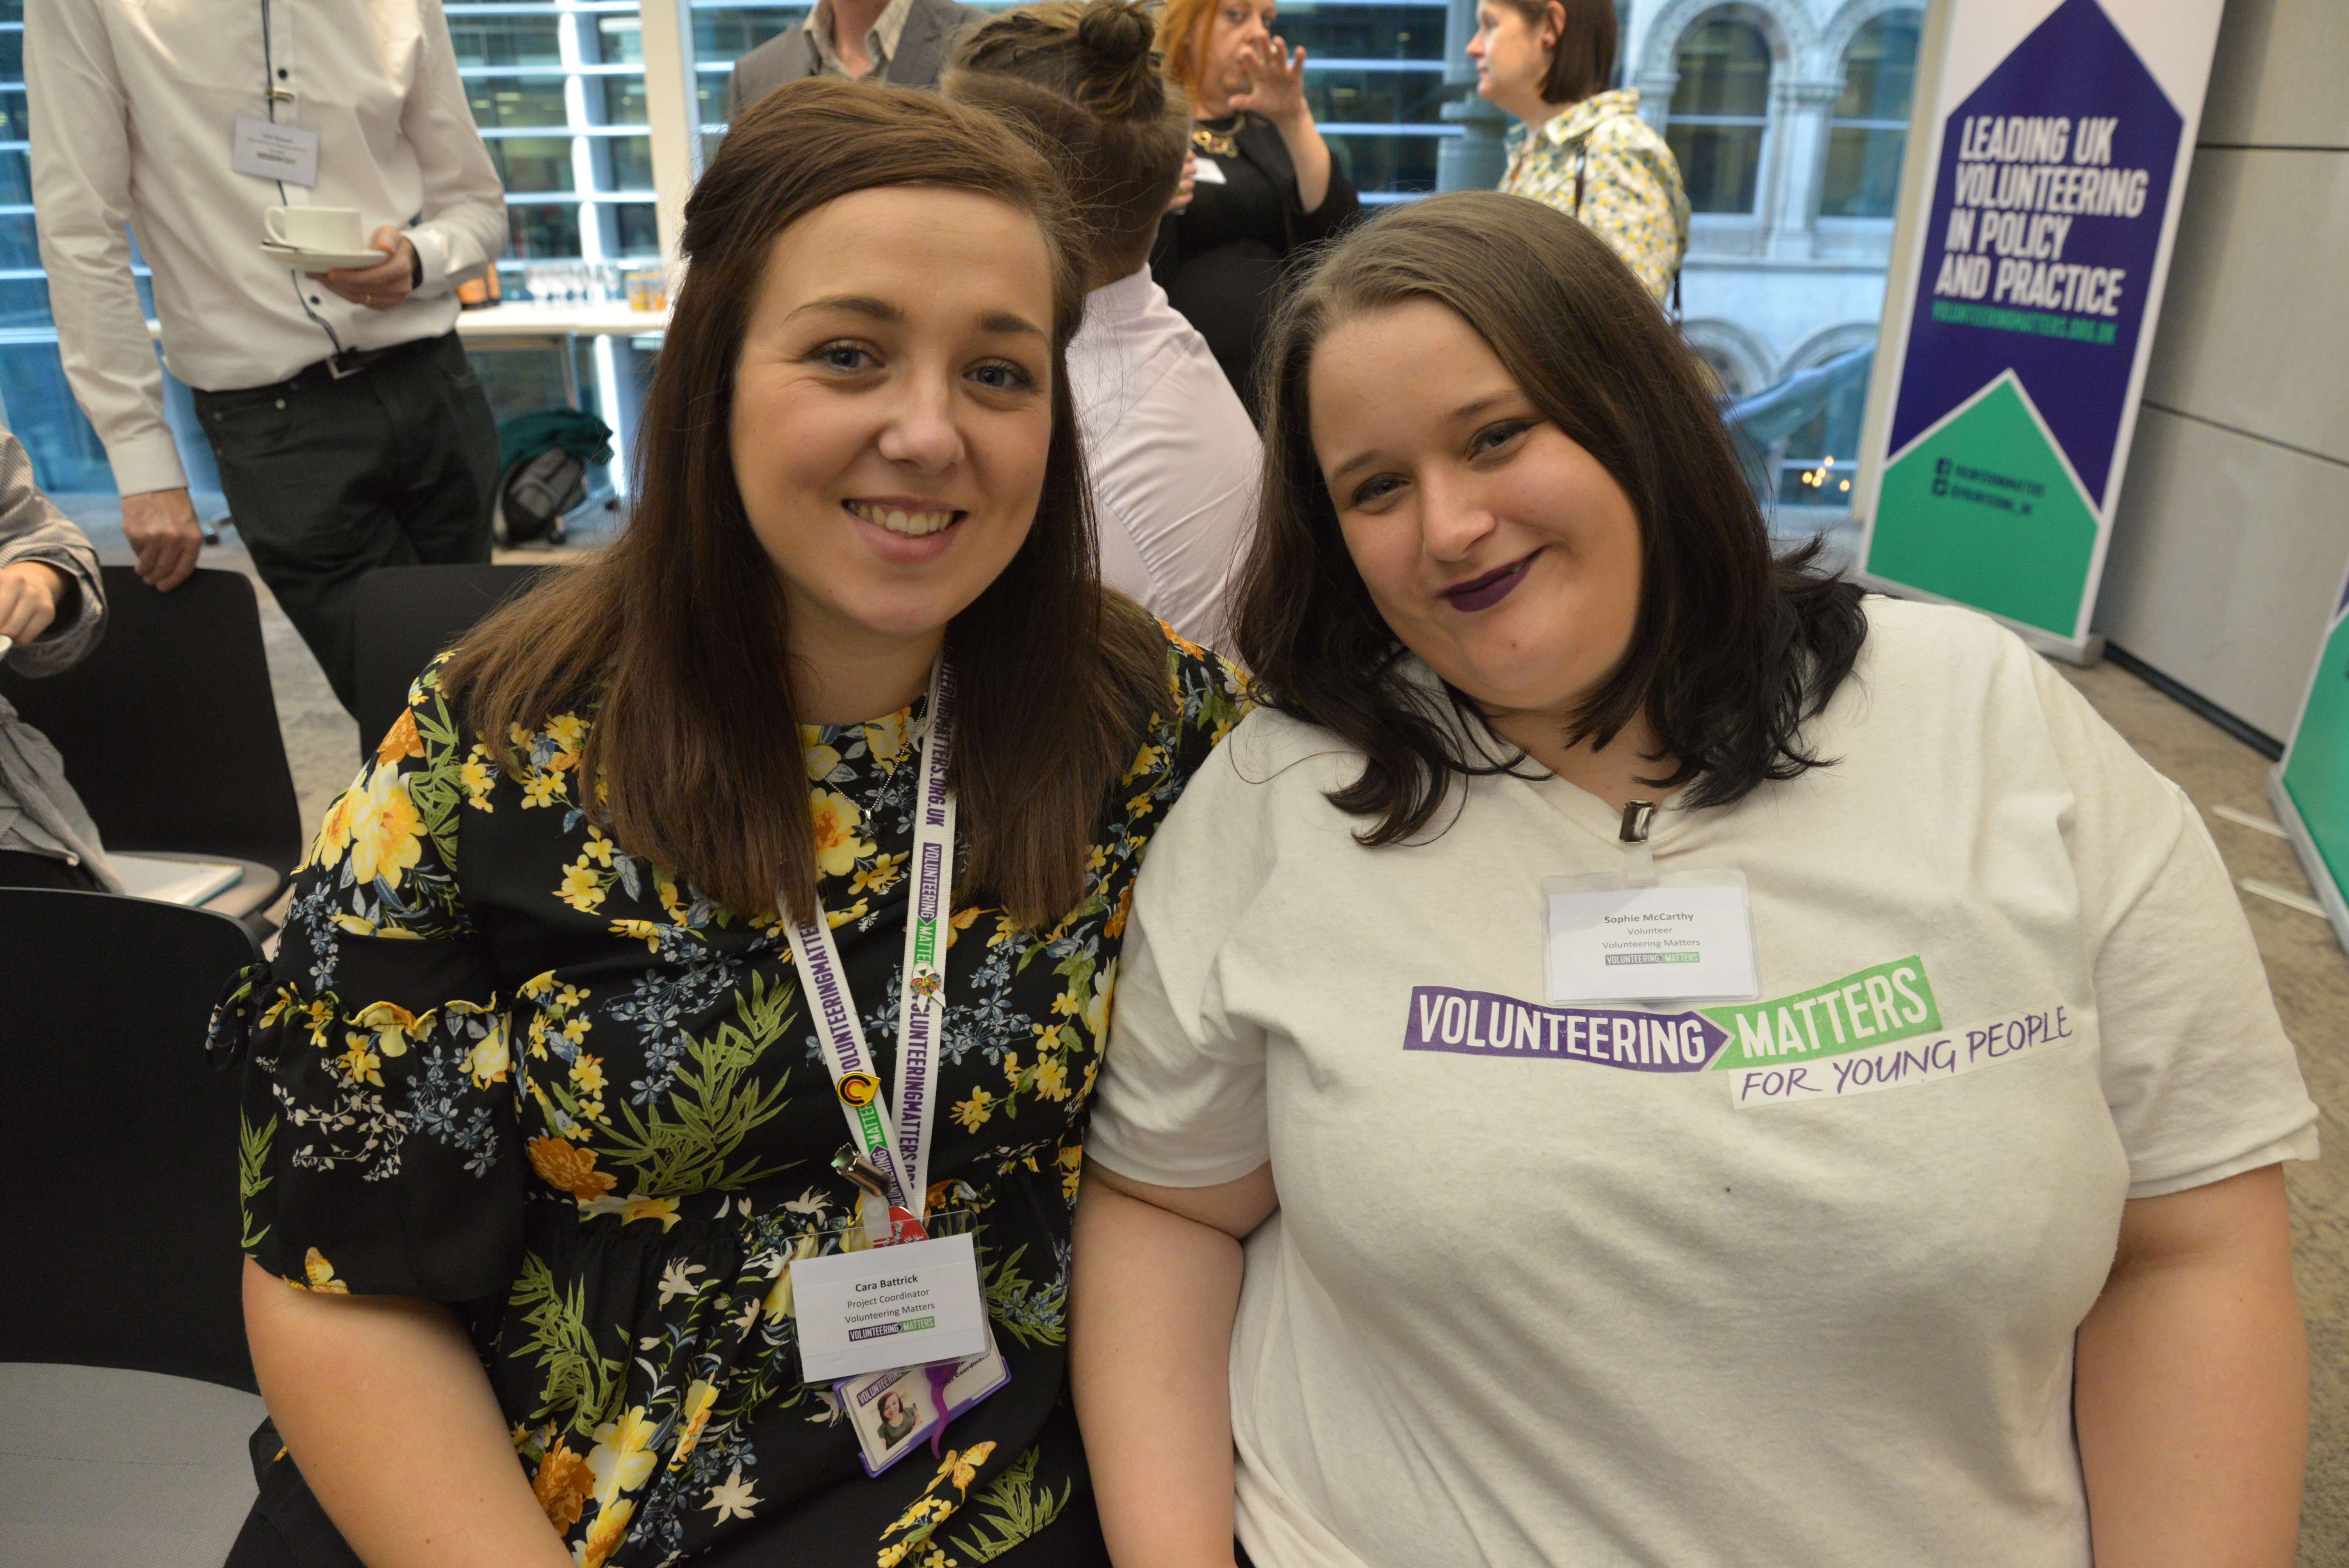 Two people looking at the camera, one has a Volunteering Matters tshirt on